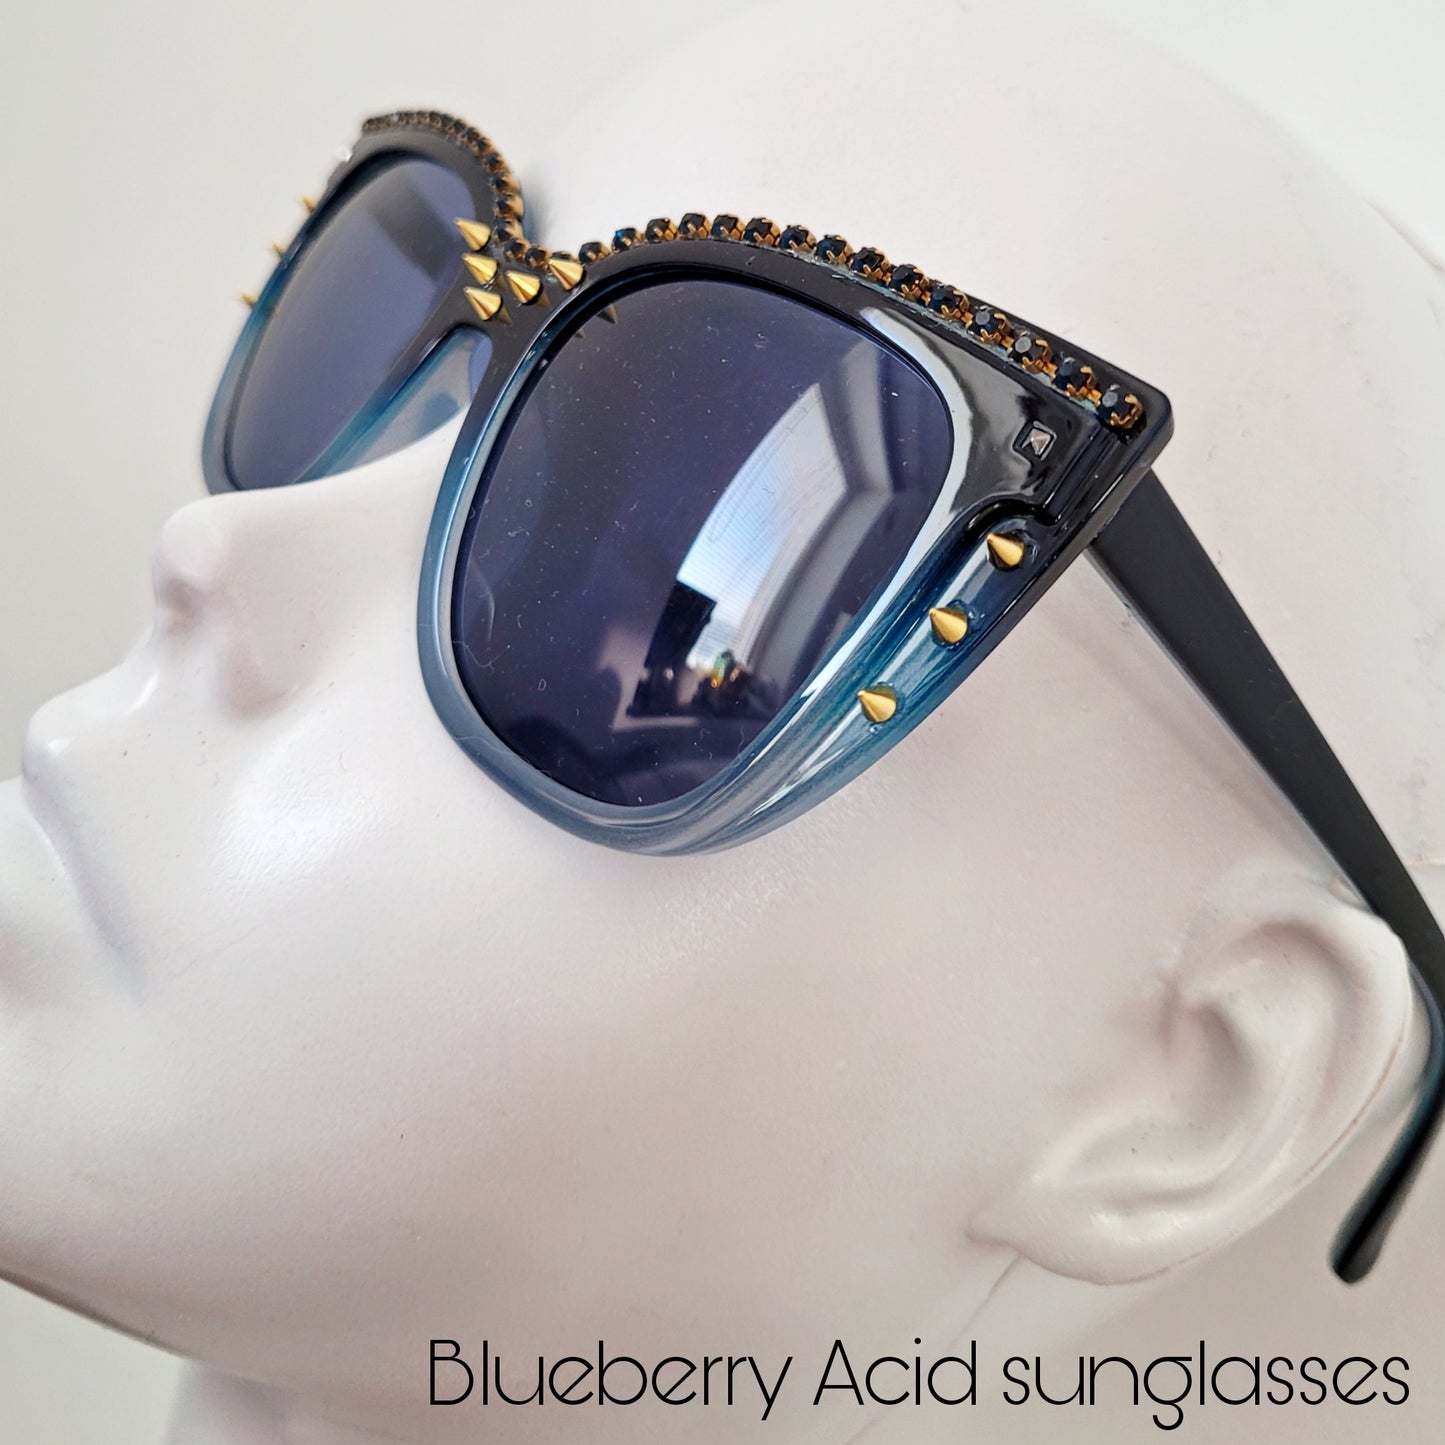 Femme Fatale Collection, the Blueberry Blast edition: The Blueberry Acid sunglasses